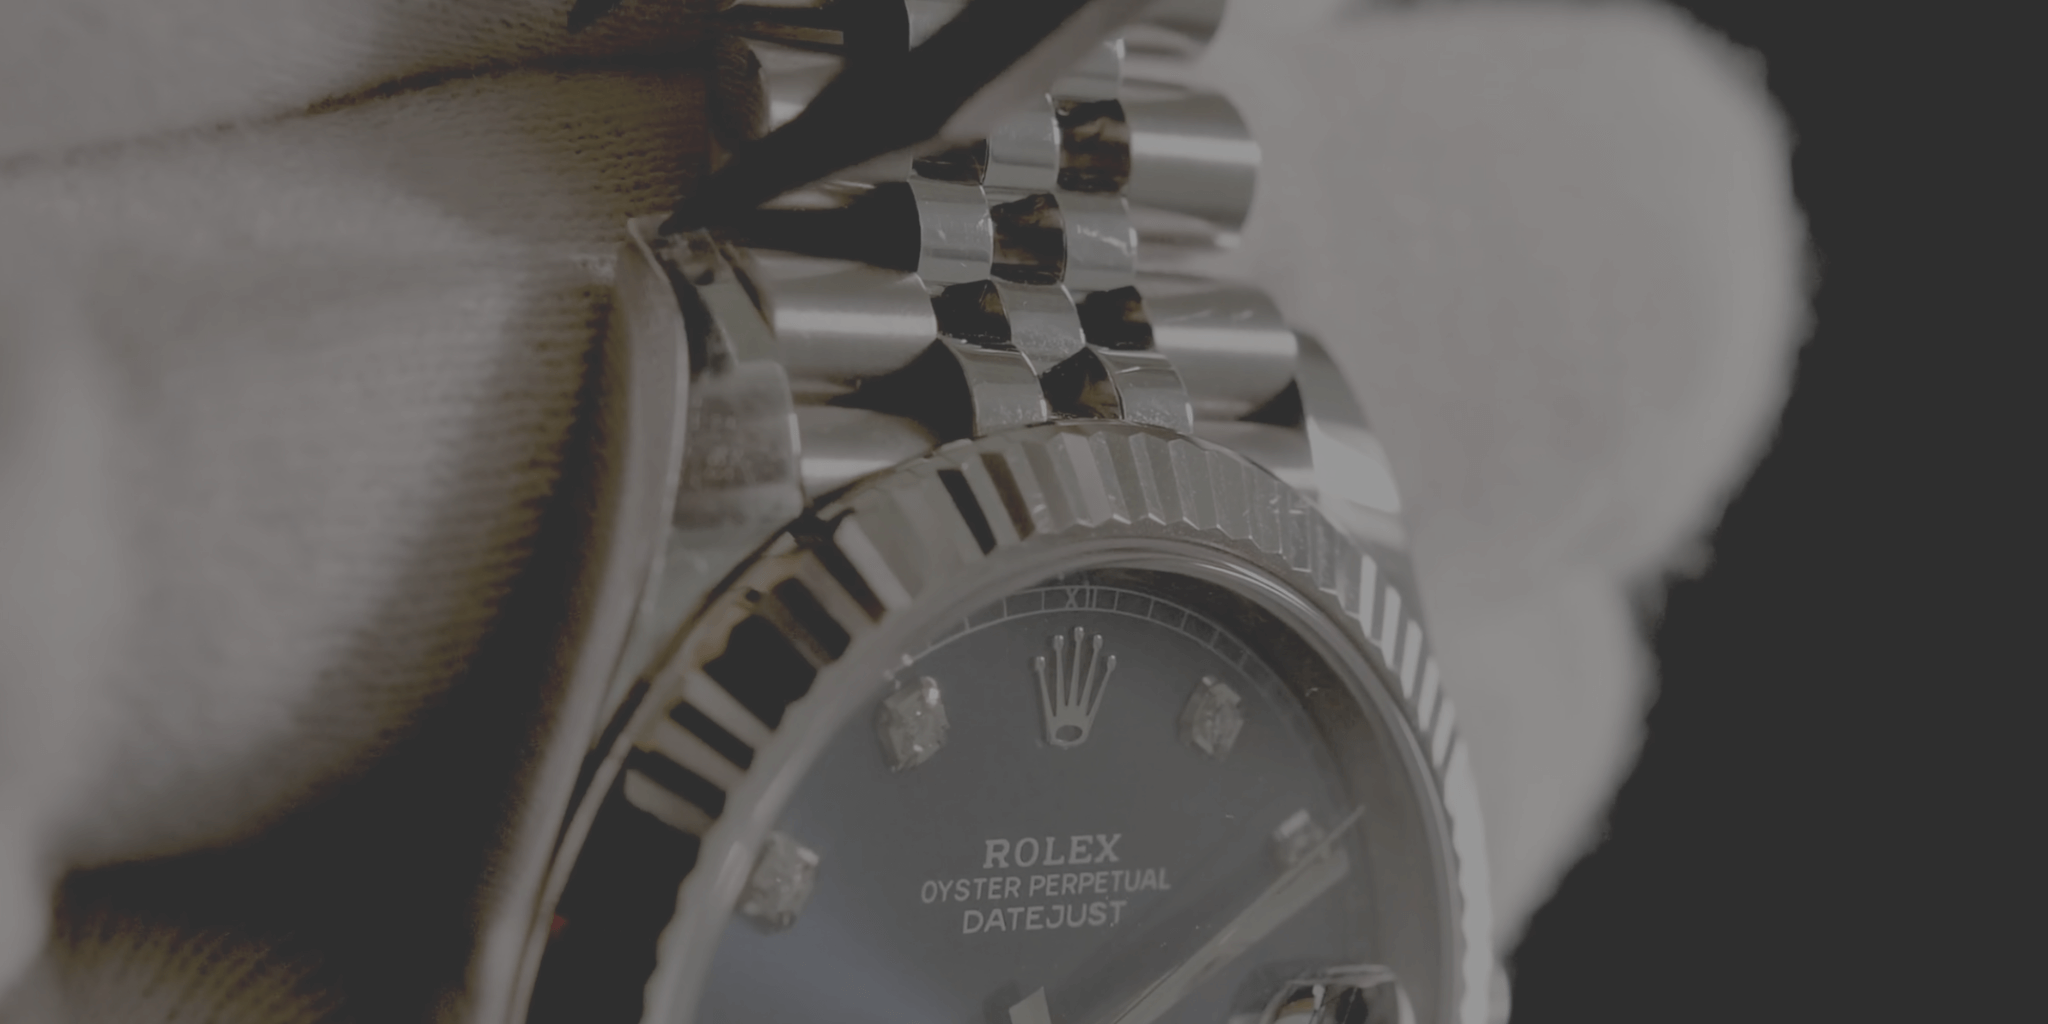 NOOYO Protection Datejust 41 Rolex Protect your Watch Desktop